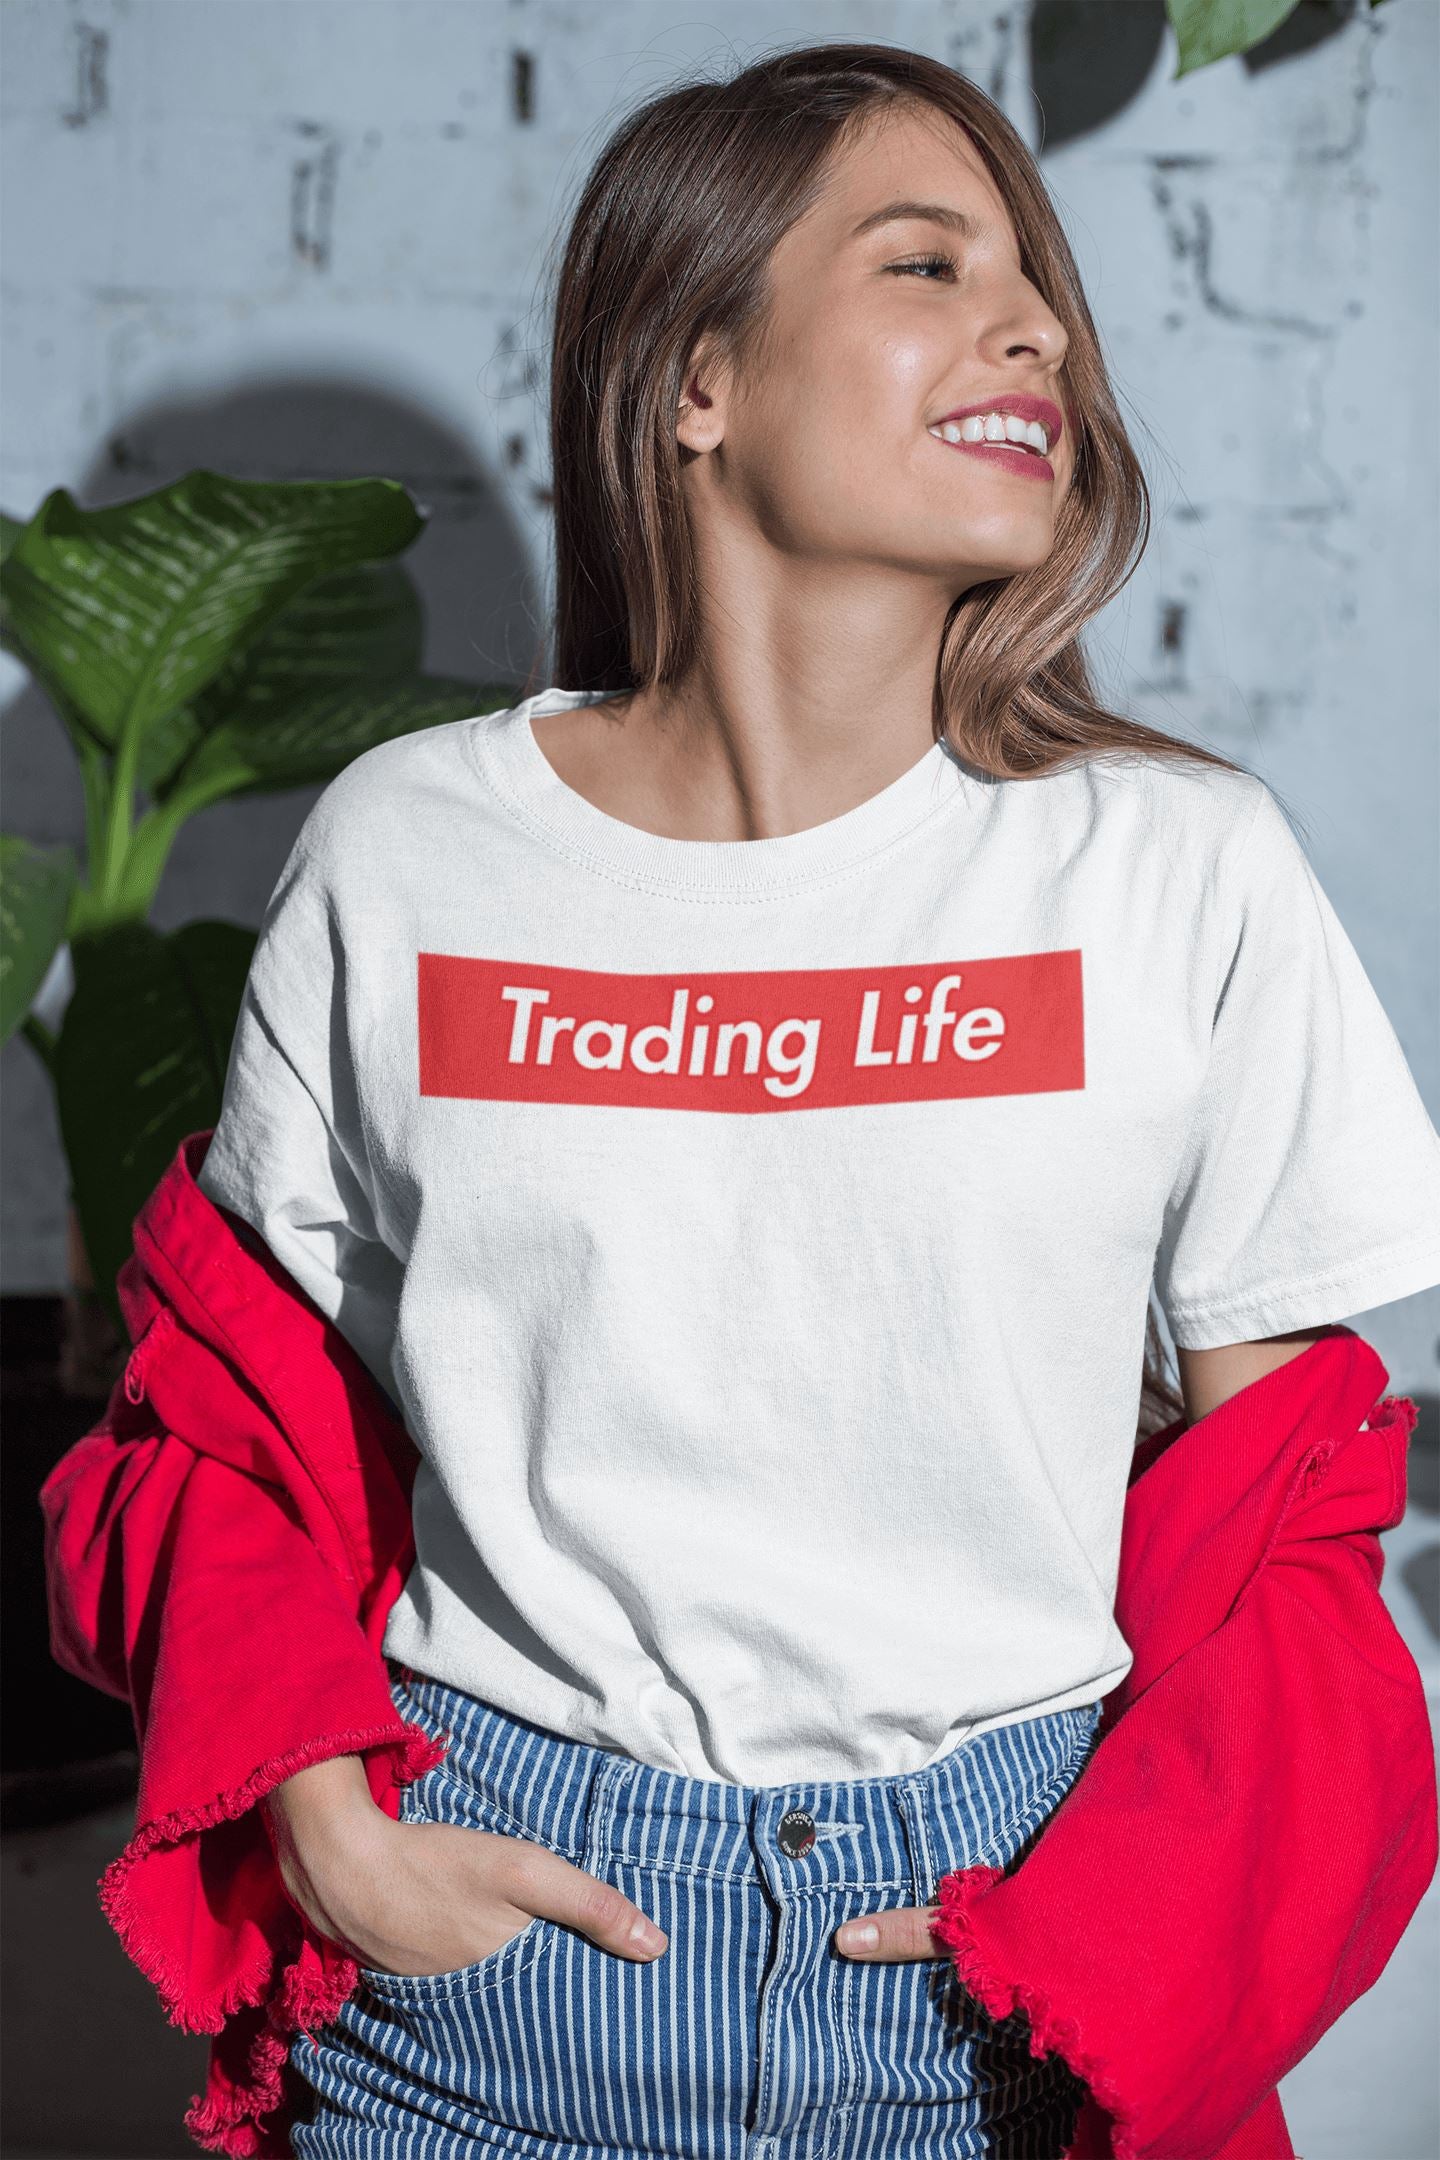 Trading Life Special T Shirt for Men and Women - Catch My Drift India  black, clothing, made in india, shirt, stock, stock market, t shirt, trader, traders, trading, trending, tshirt